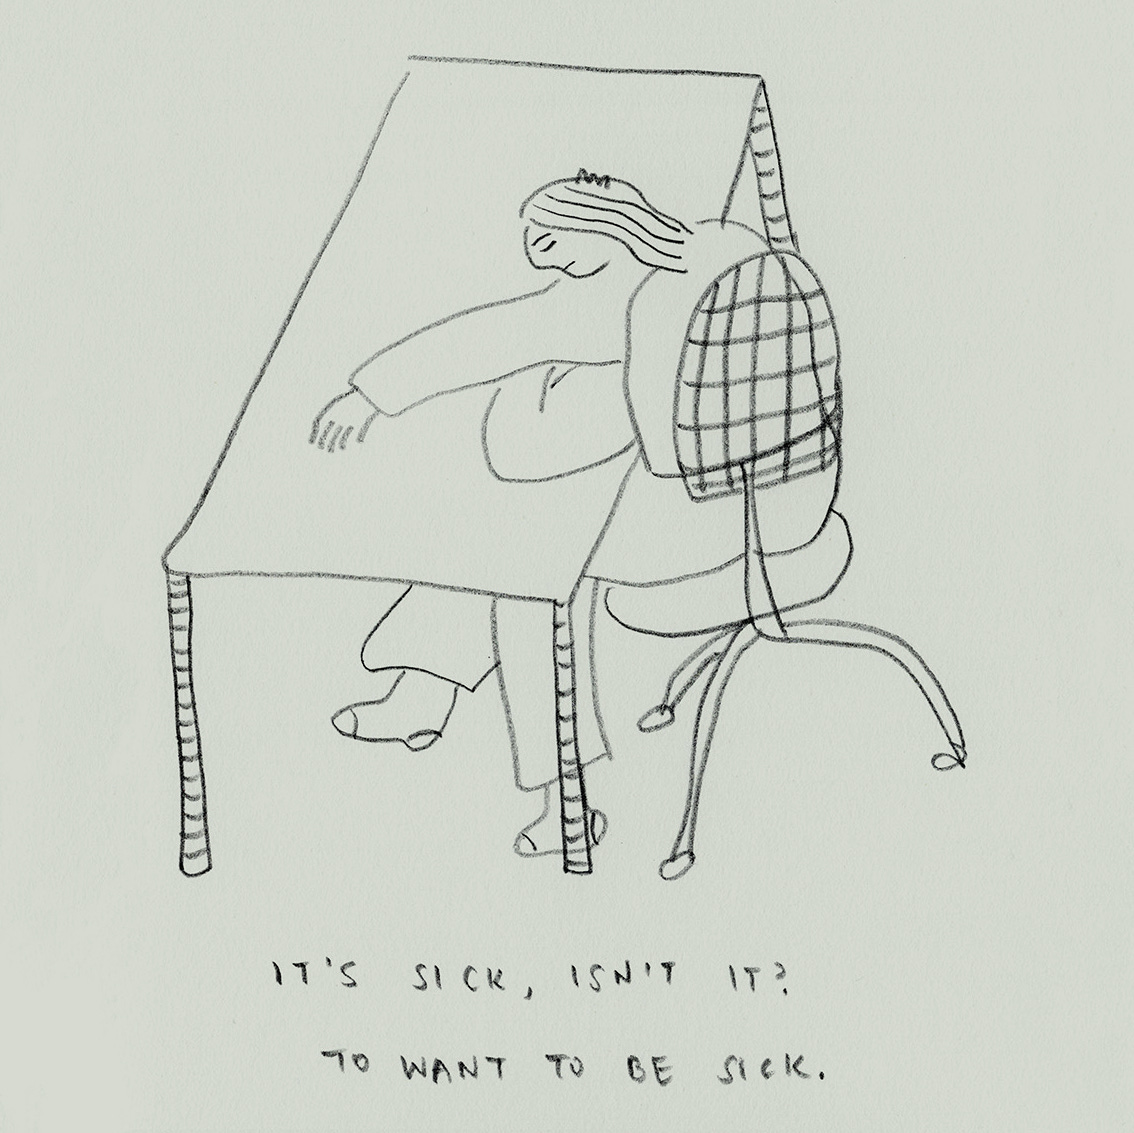 Image of woman lying her head down on a desk, with caption "it's sick, isn't it? To want to be sick."